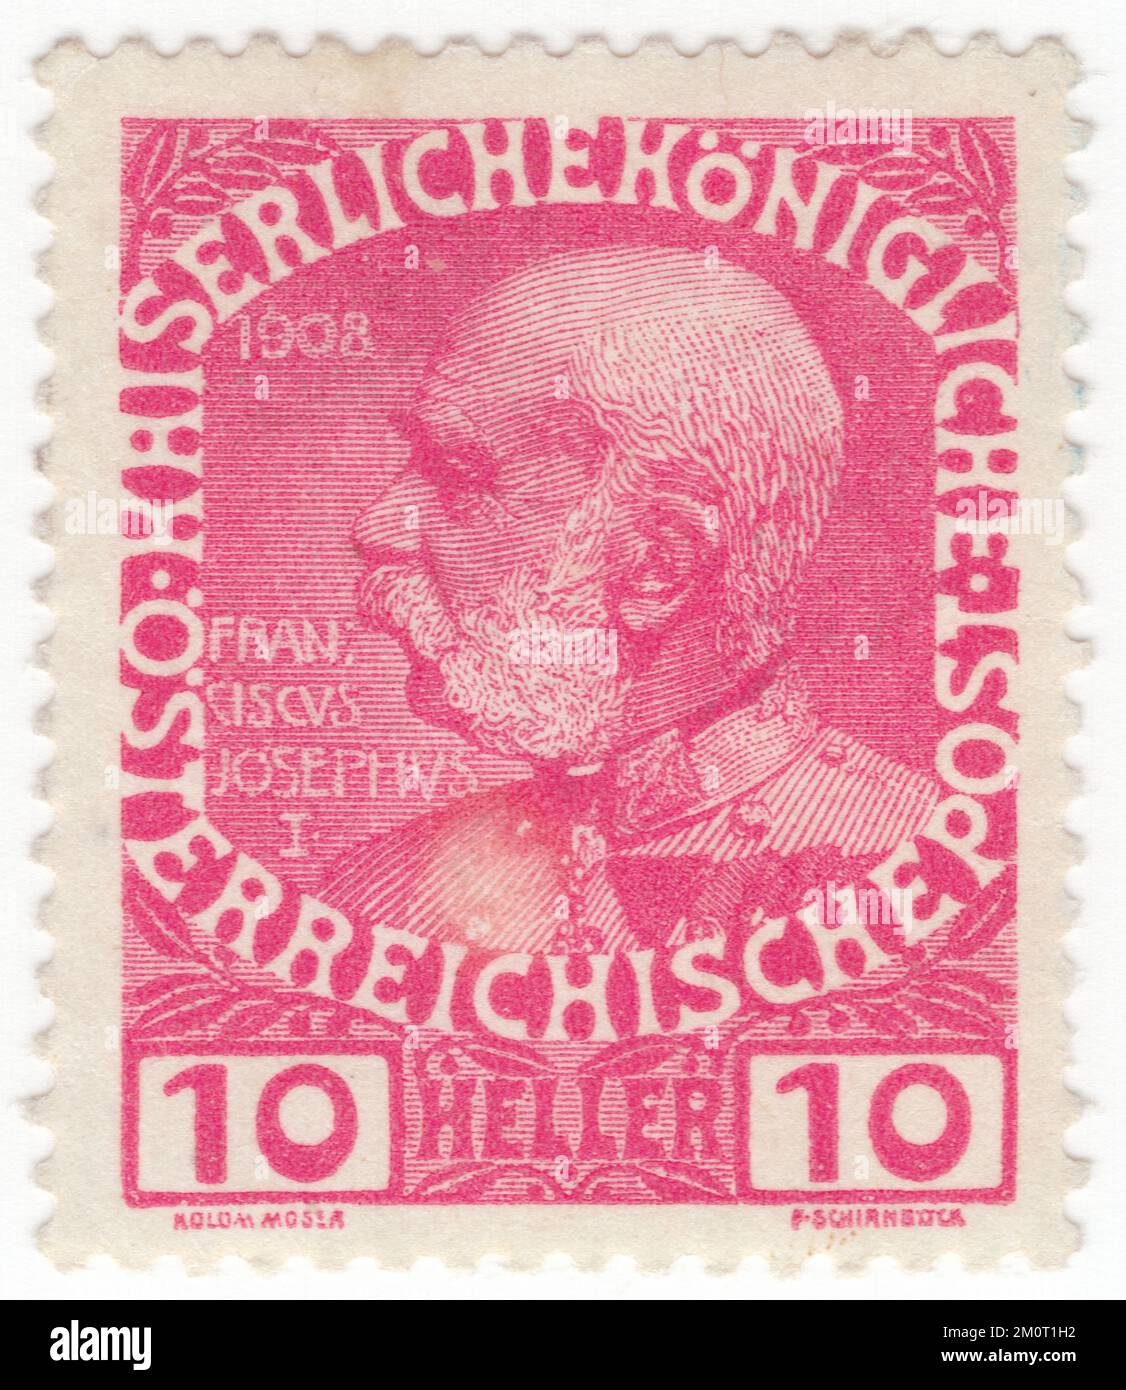 AUSTRIA — 1913: An 10 heller rose postage stamp depicting portrait of Franz Joseph I. Definitive set issued for the 60th year of the reign of Austrian Monarch Franz Josef, Emperor of Austria, King of Hungary, and the other states of the Habsburg monarchy. Franz Joseph I or Francis Joseph I  was Emperor of Austria, King of Hungary, and the other states of the Habsburg monarchy from 2 December 1848 until his death on 21 November 1916.[1] In the early part of his reign, his realms and territories were referred to as the Austrian Empire, but were reconstituted as the dual monarchy Stock Photo